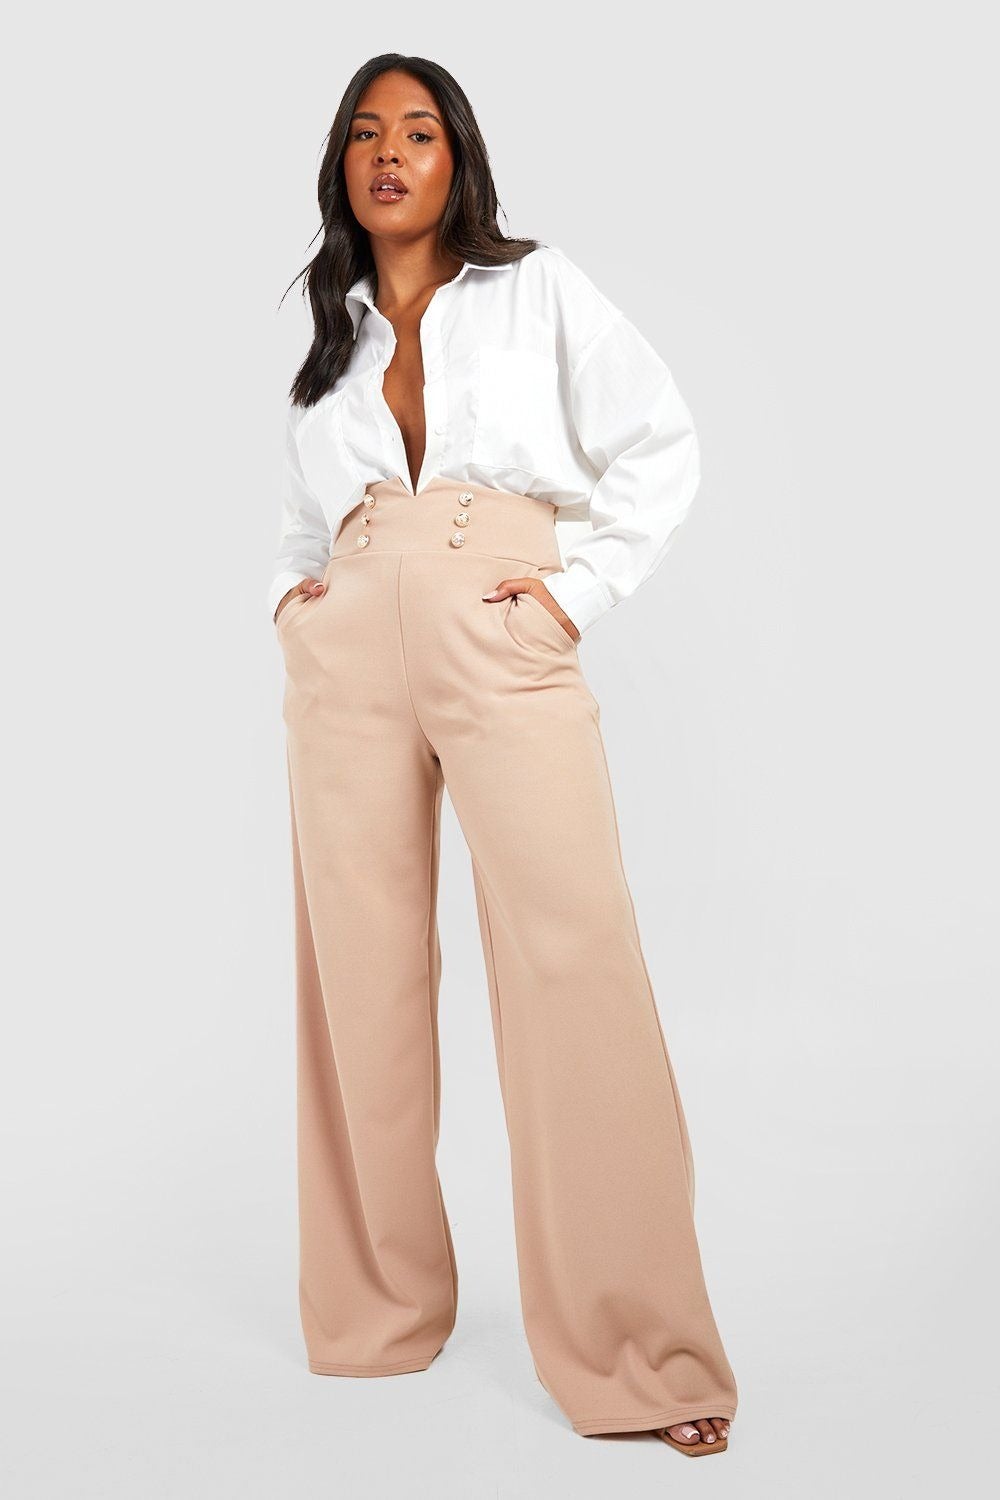 40 Best Pairs of Pants for Spring That Aren't Jeans